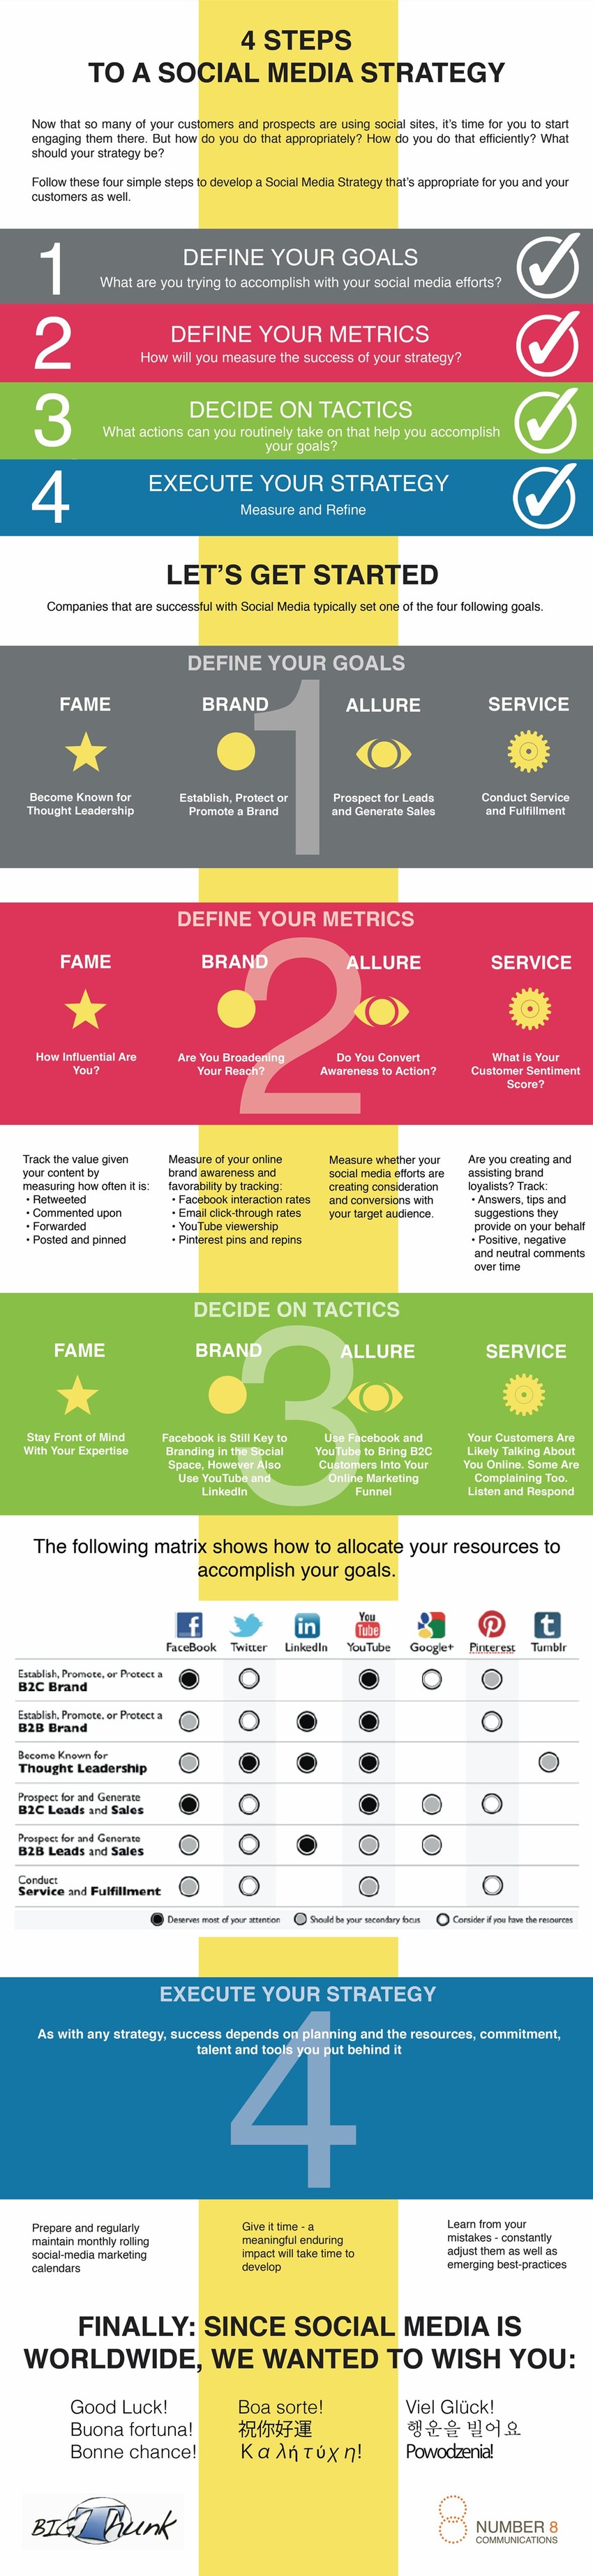 Four Steps to a Social Media Strategy [Infographic] | The MarTech Digest | Scoop.it